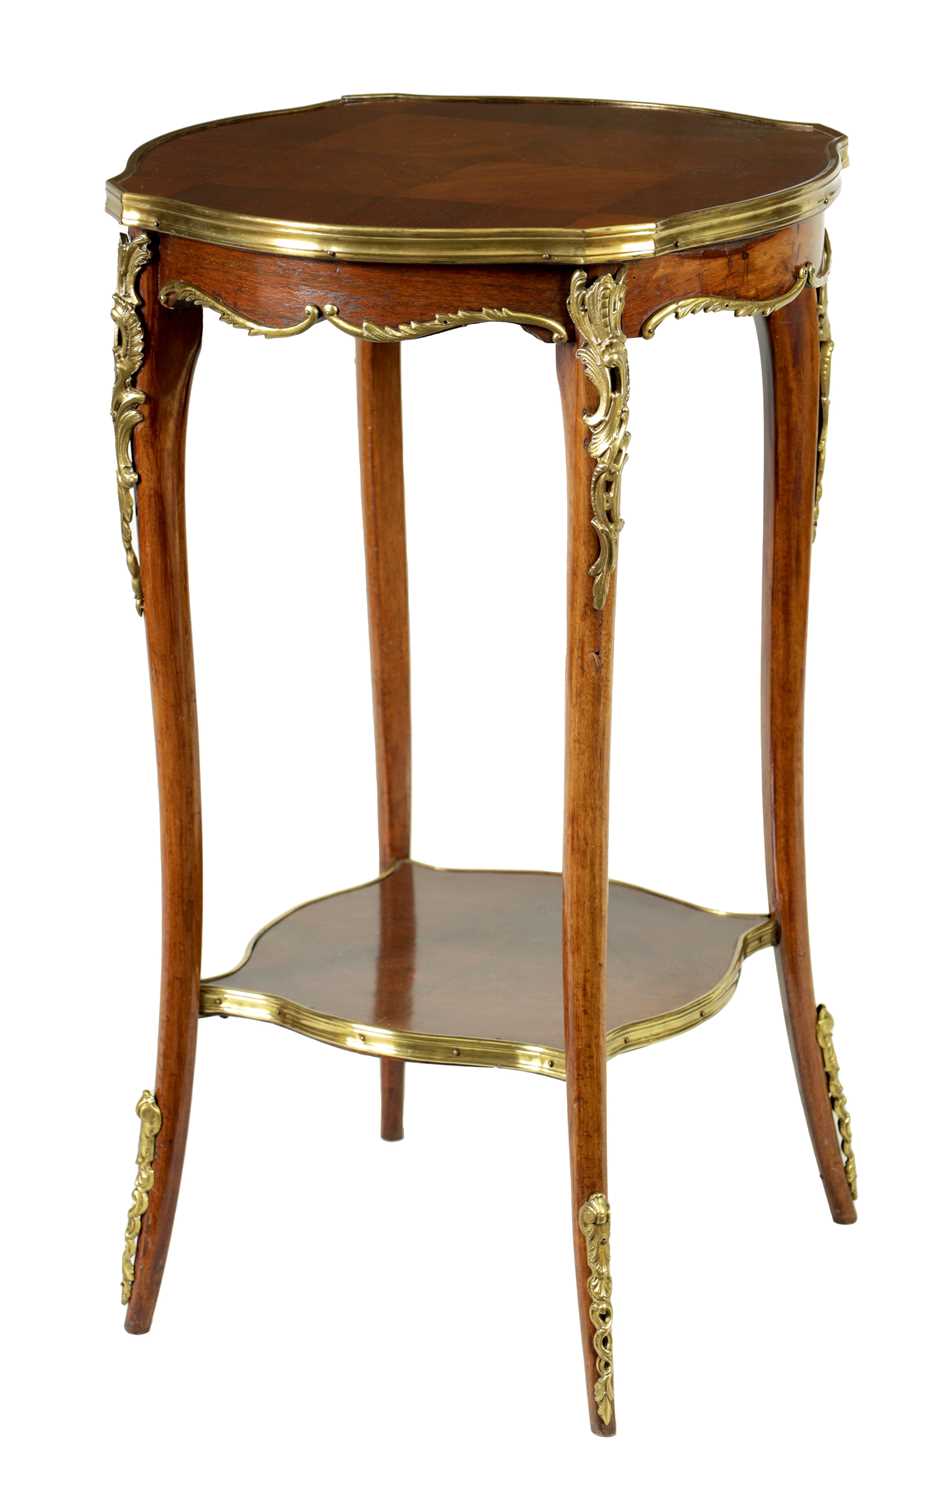 A LATE 19TH CENTURY FRENCH ORMOLU MOUNTED WALNUT OCCASIONAL TABLE